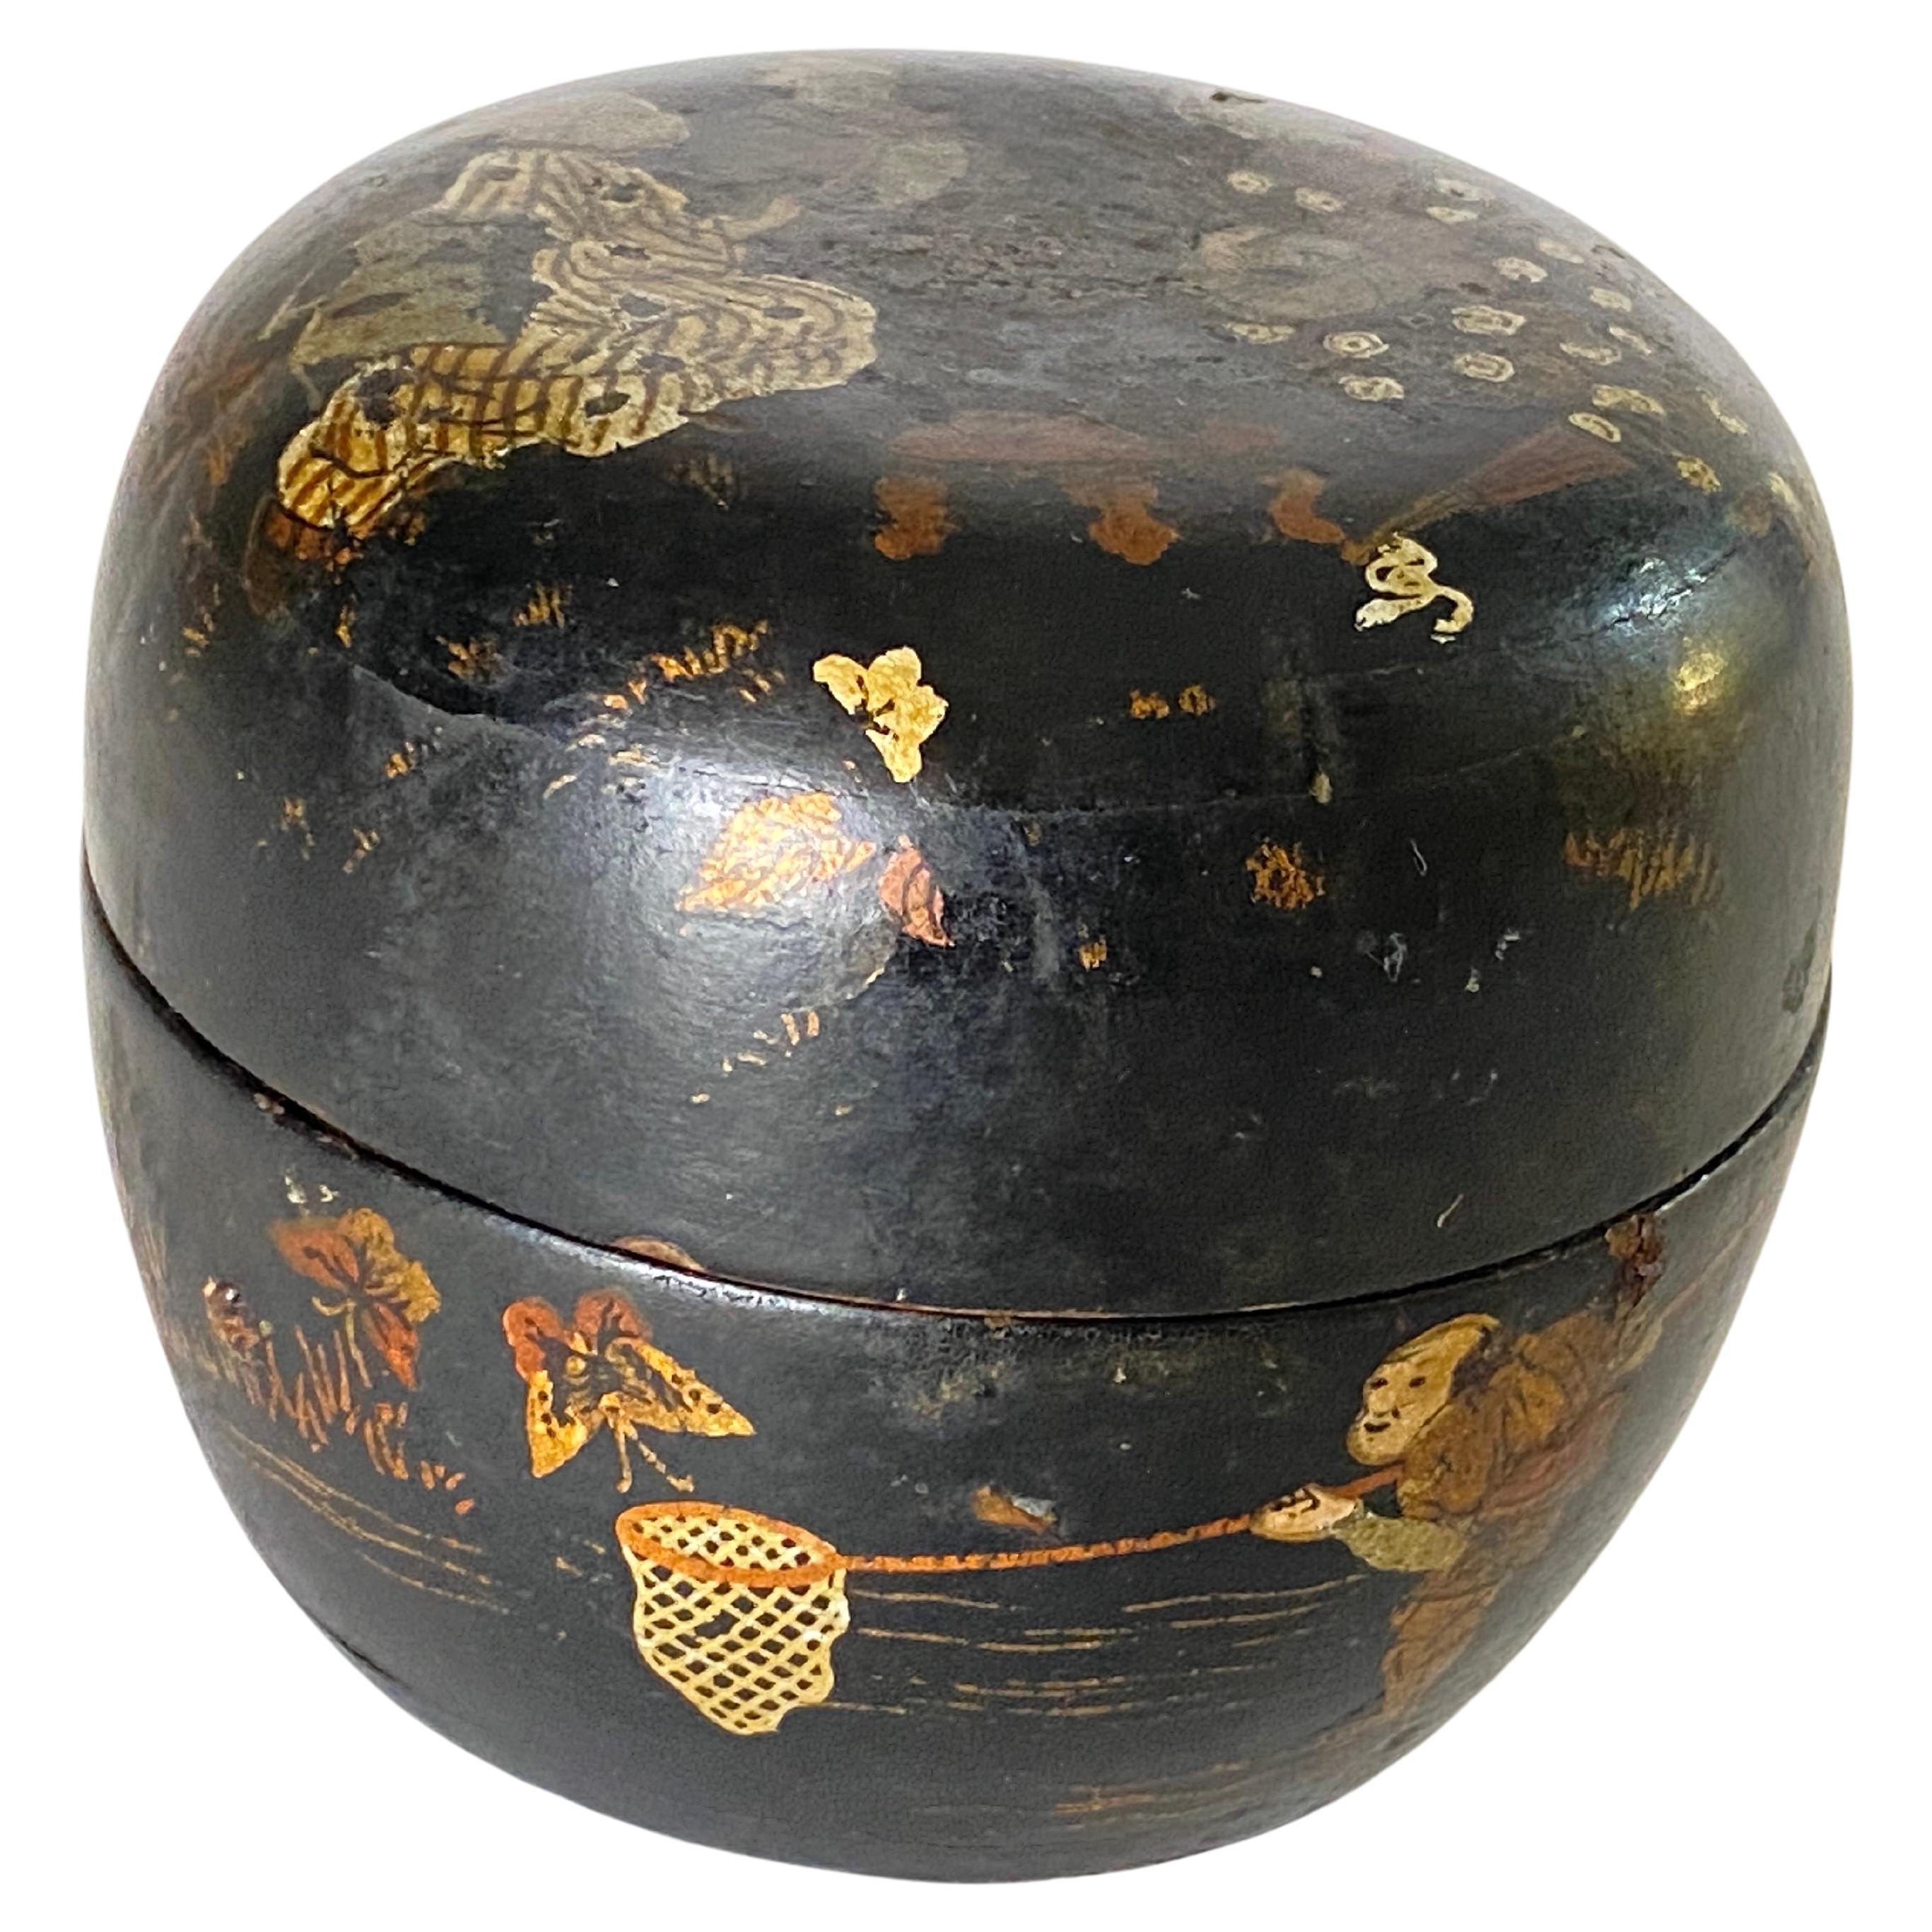 This is a beautiful papier mâché, circular lacquered lidded box, which we attribute to being made in Japan during the early 20th century, circa 1910.

This is a very decorative box with a delicately hand-painted scene. The base color is black with